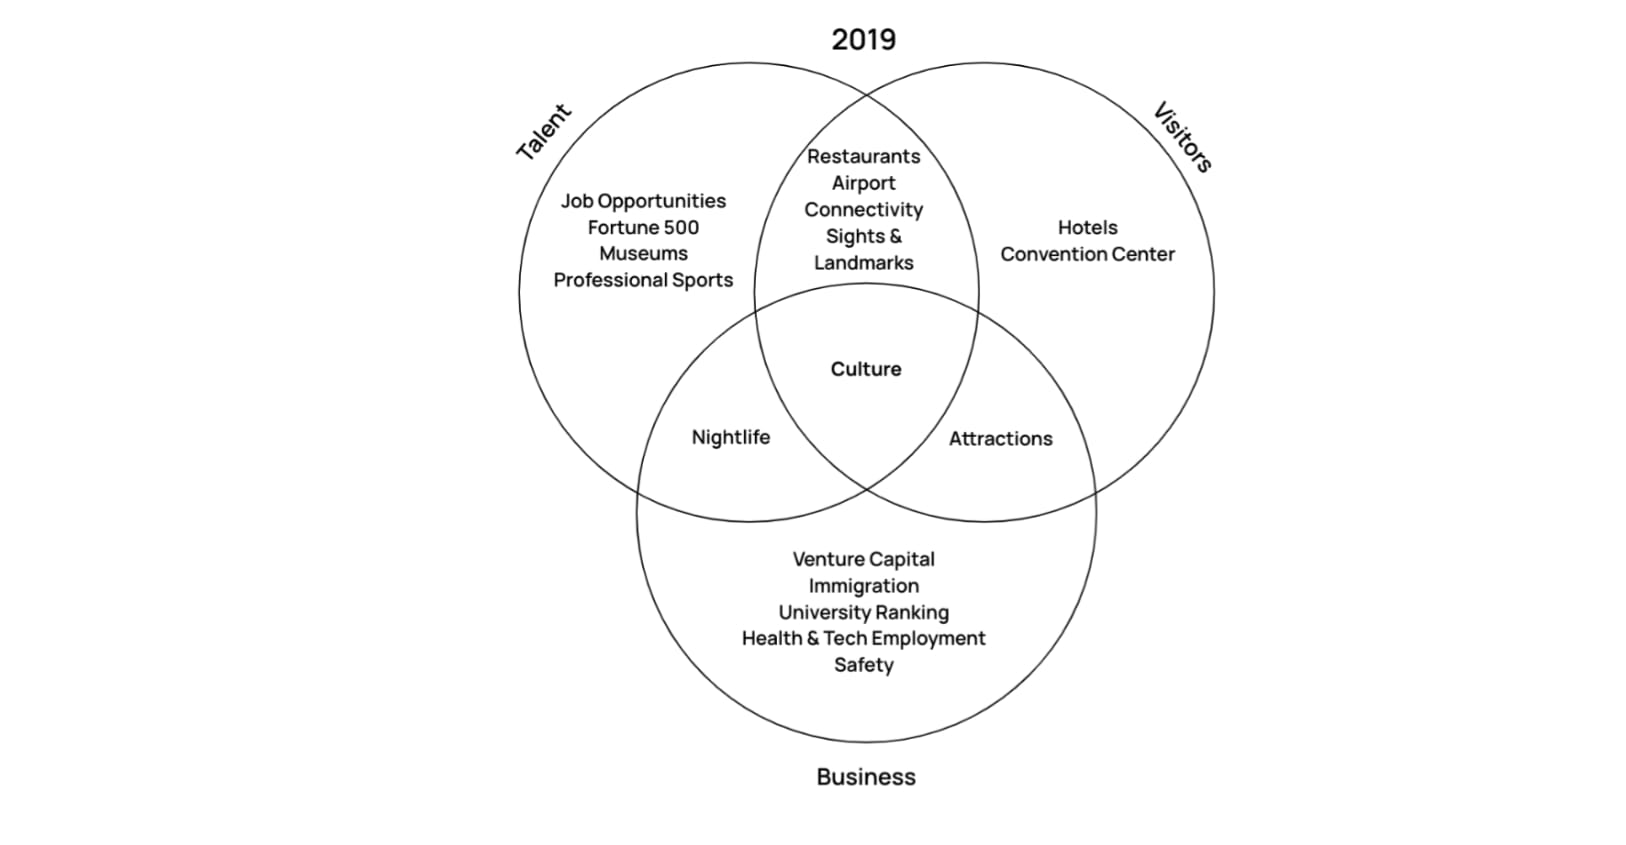 A venn diagram to show common factors for 2019. The three circles are marked talent, visitors, and businesses respectively. Only culture is shown to be at the intersection of all three circles.